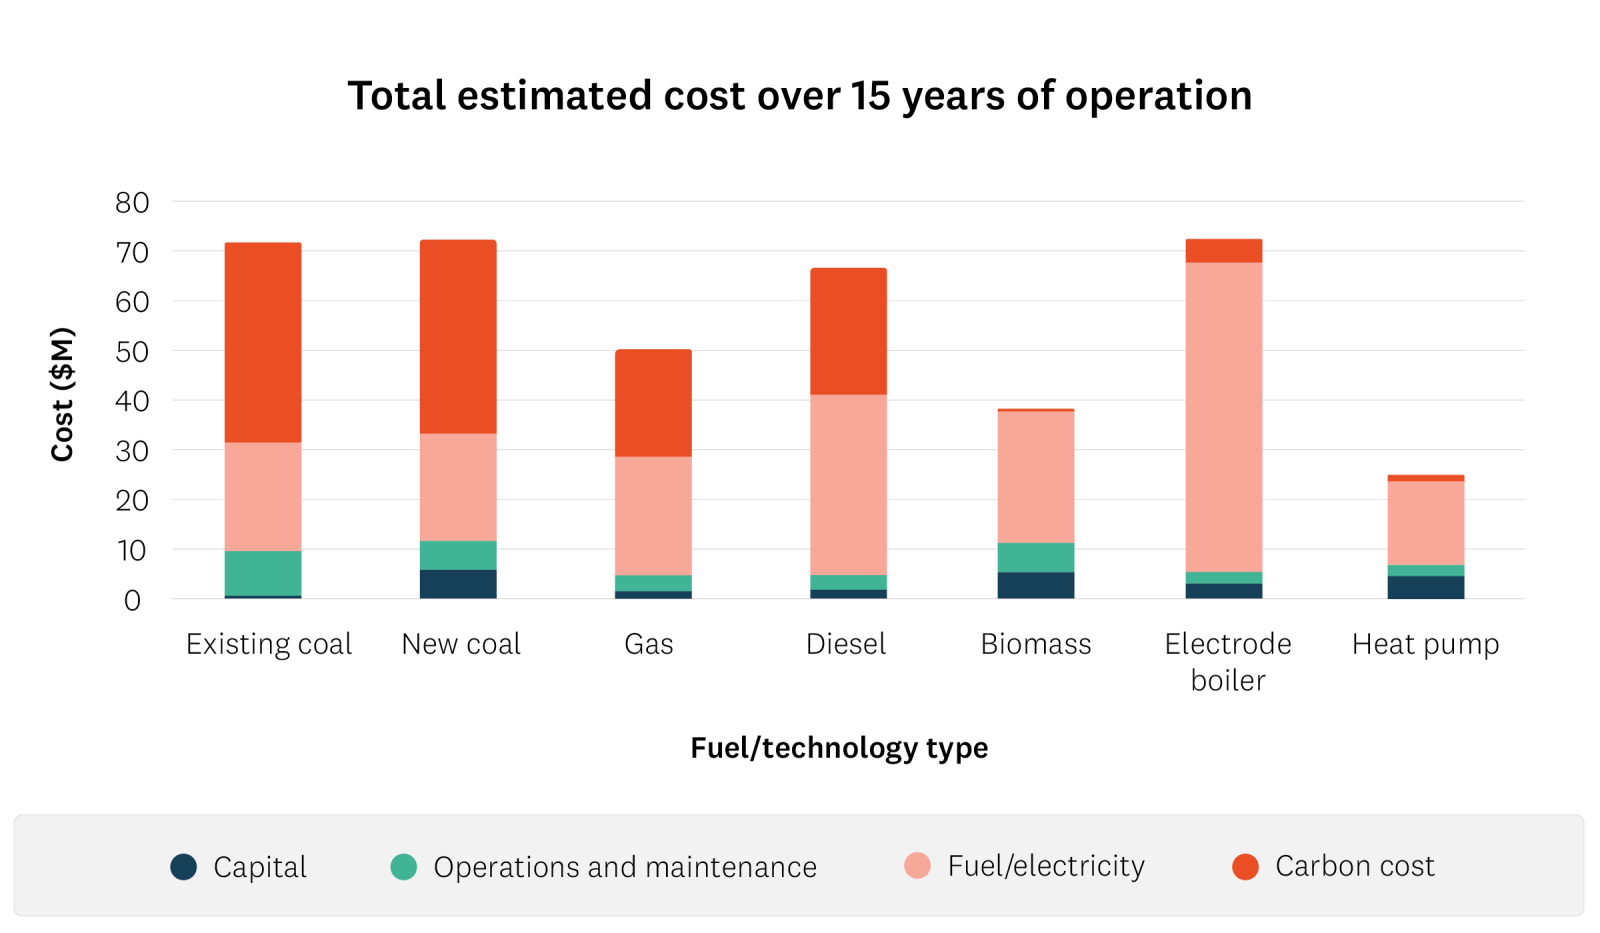 Graph shows the total estimated cost for different types of boilers/heat plants over of 15 years of operation. 